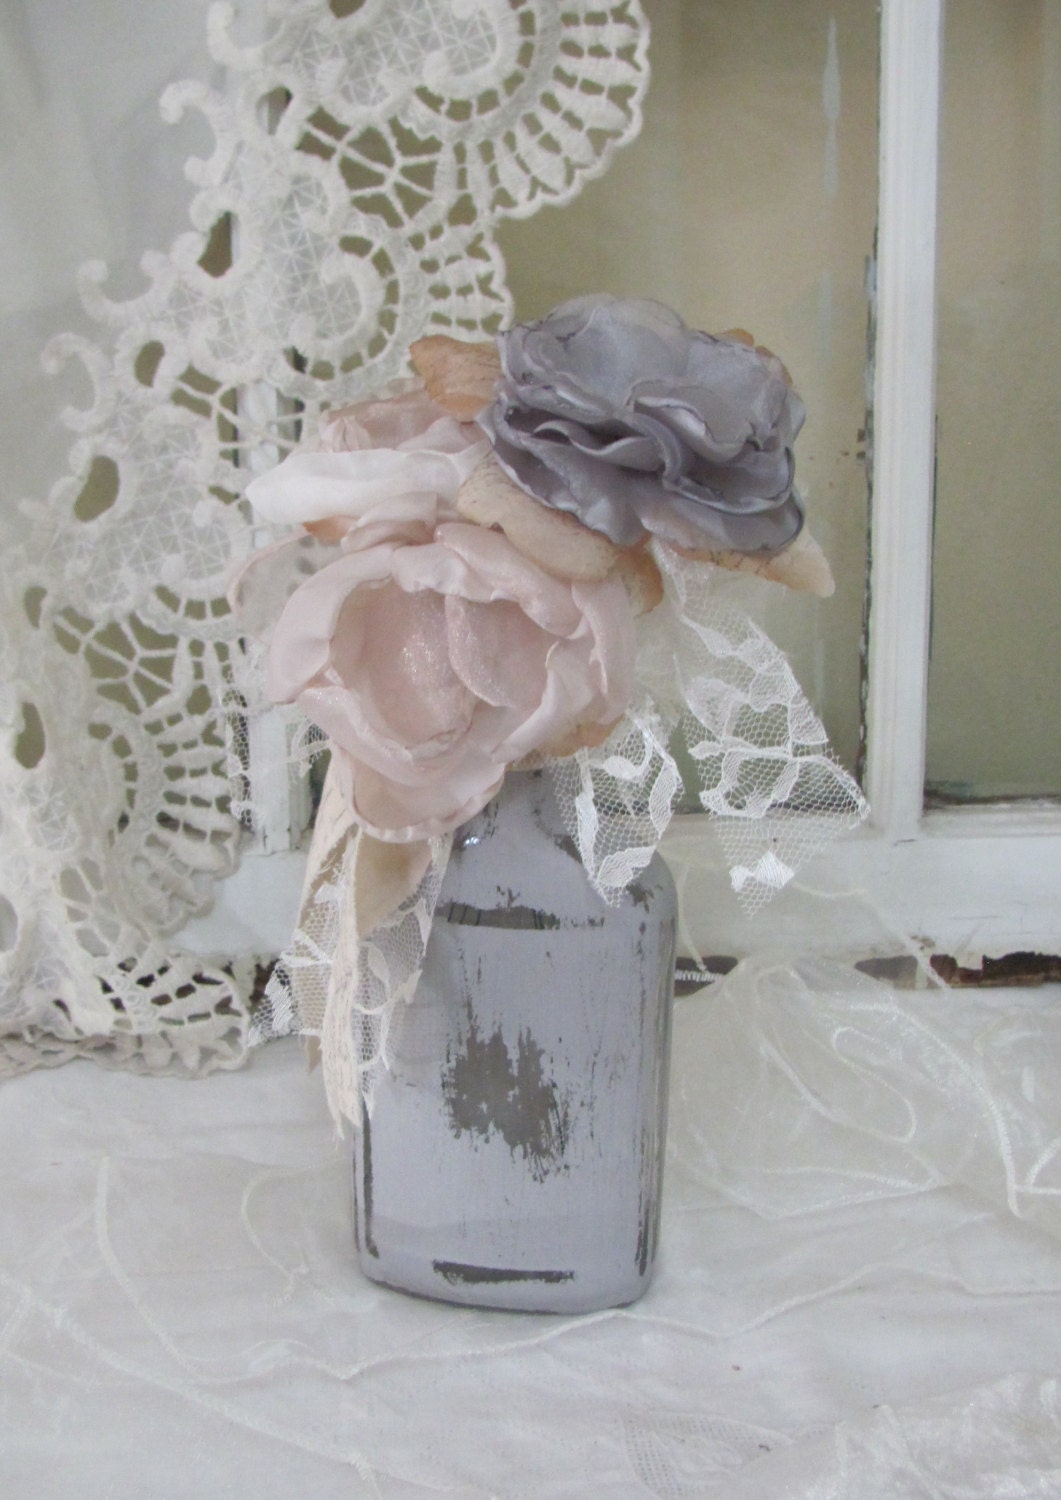 Wedding Centerpiece / Decor / Decoration / Vase / Shabby Chic and Rustic by Burlap And Bling Desig Studio